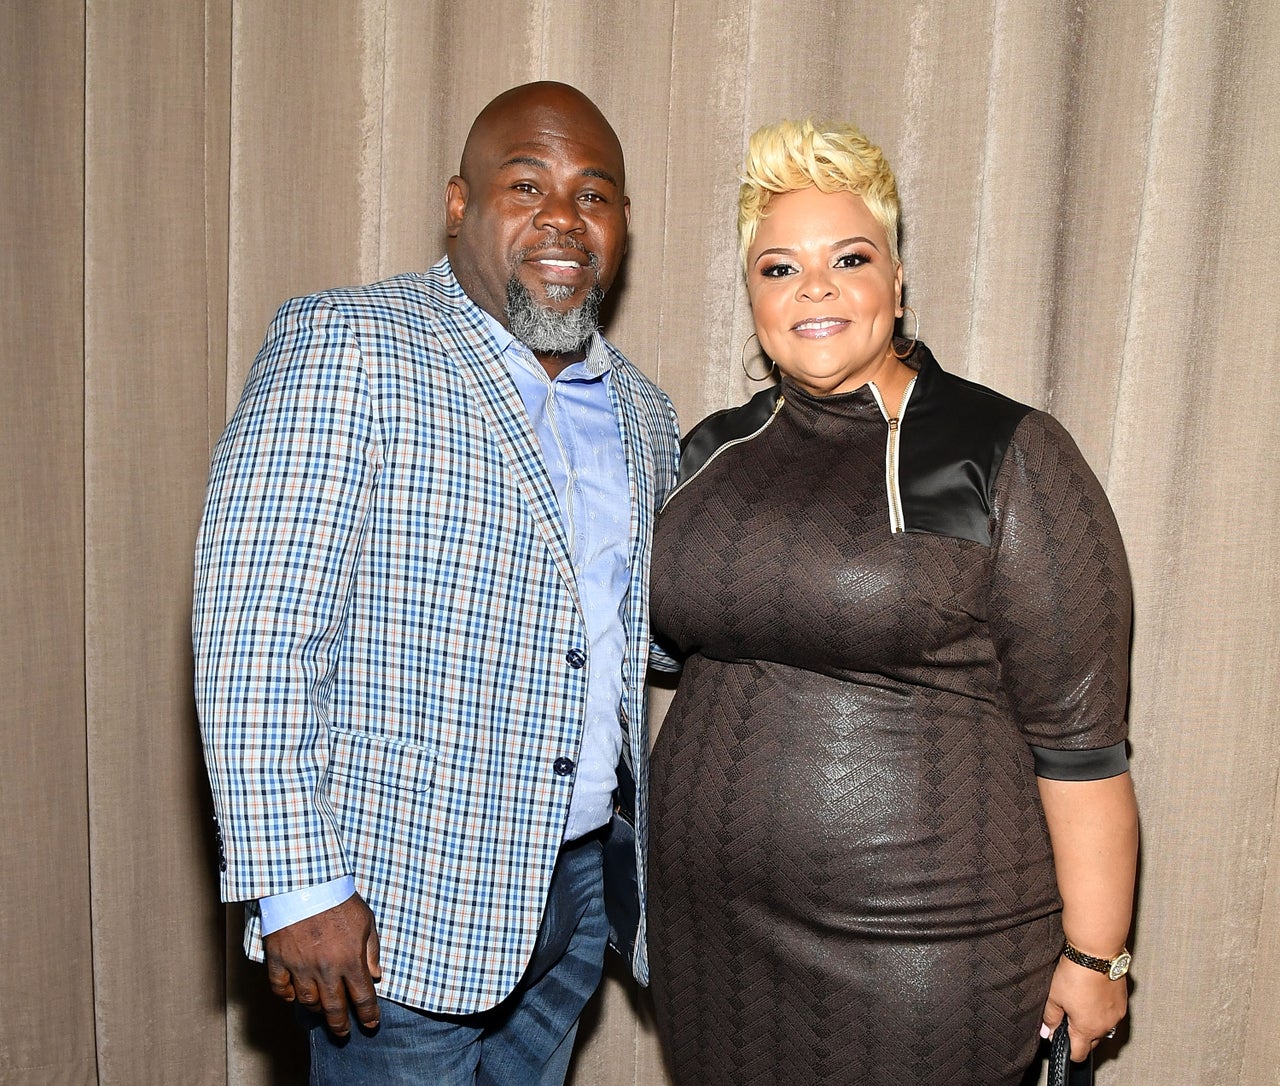 David And Tamela Mann On 34 Years Of Marriage: I've Found A Good Thing -   - Where Wellness & Culture Connect